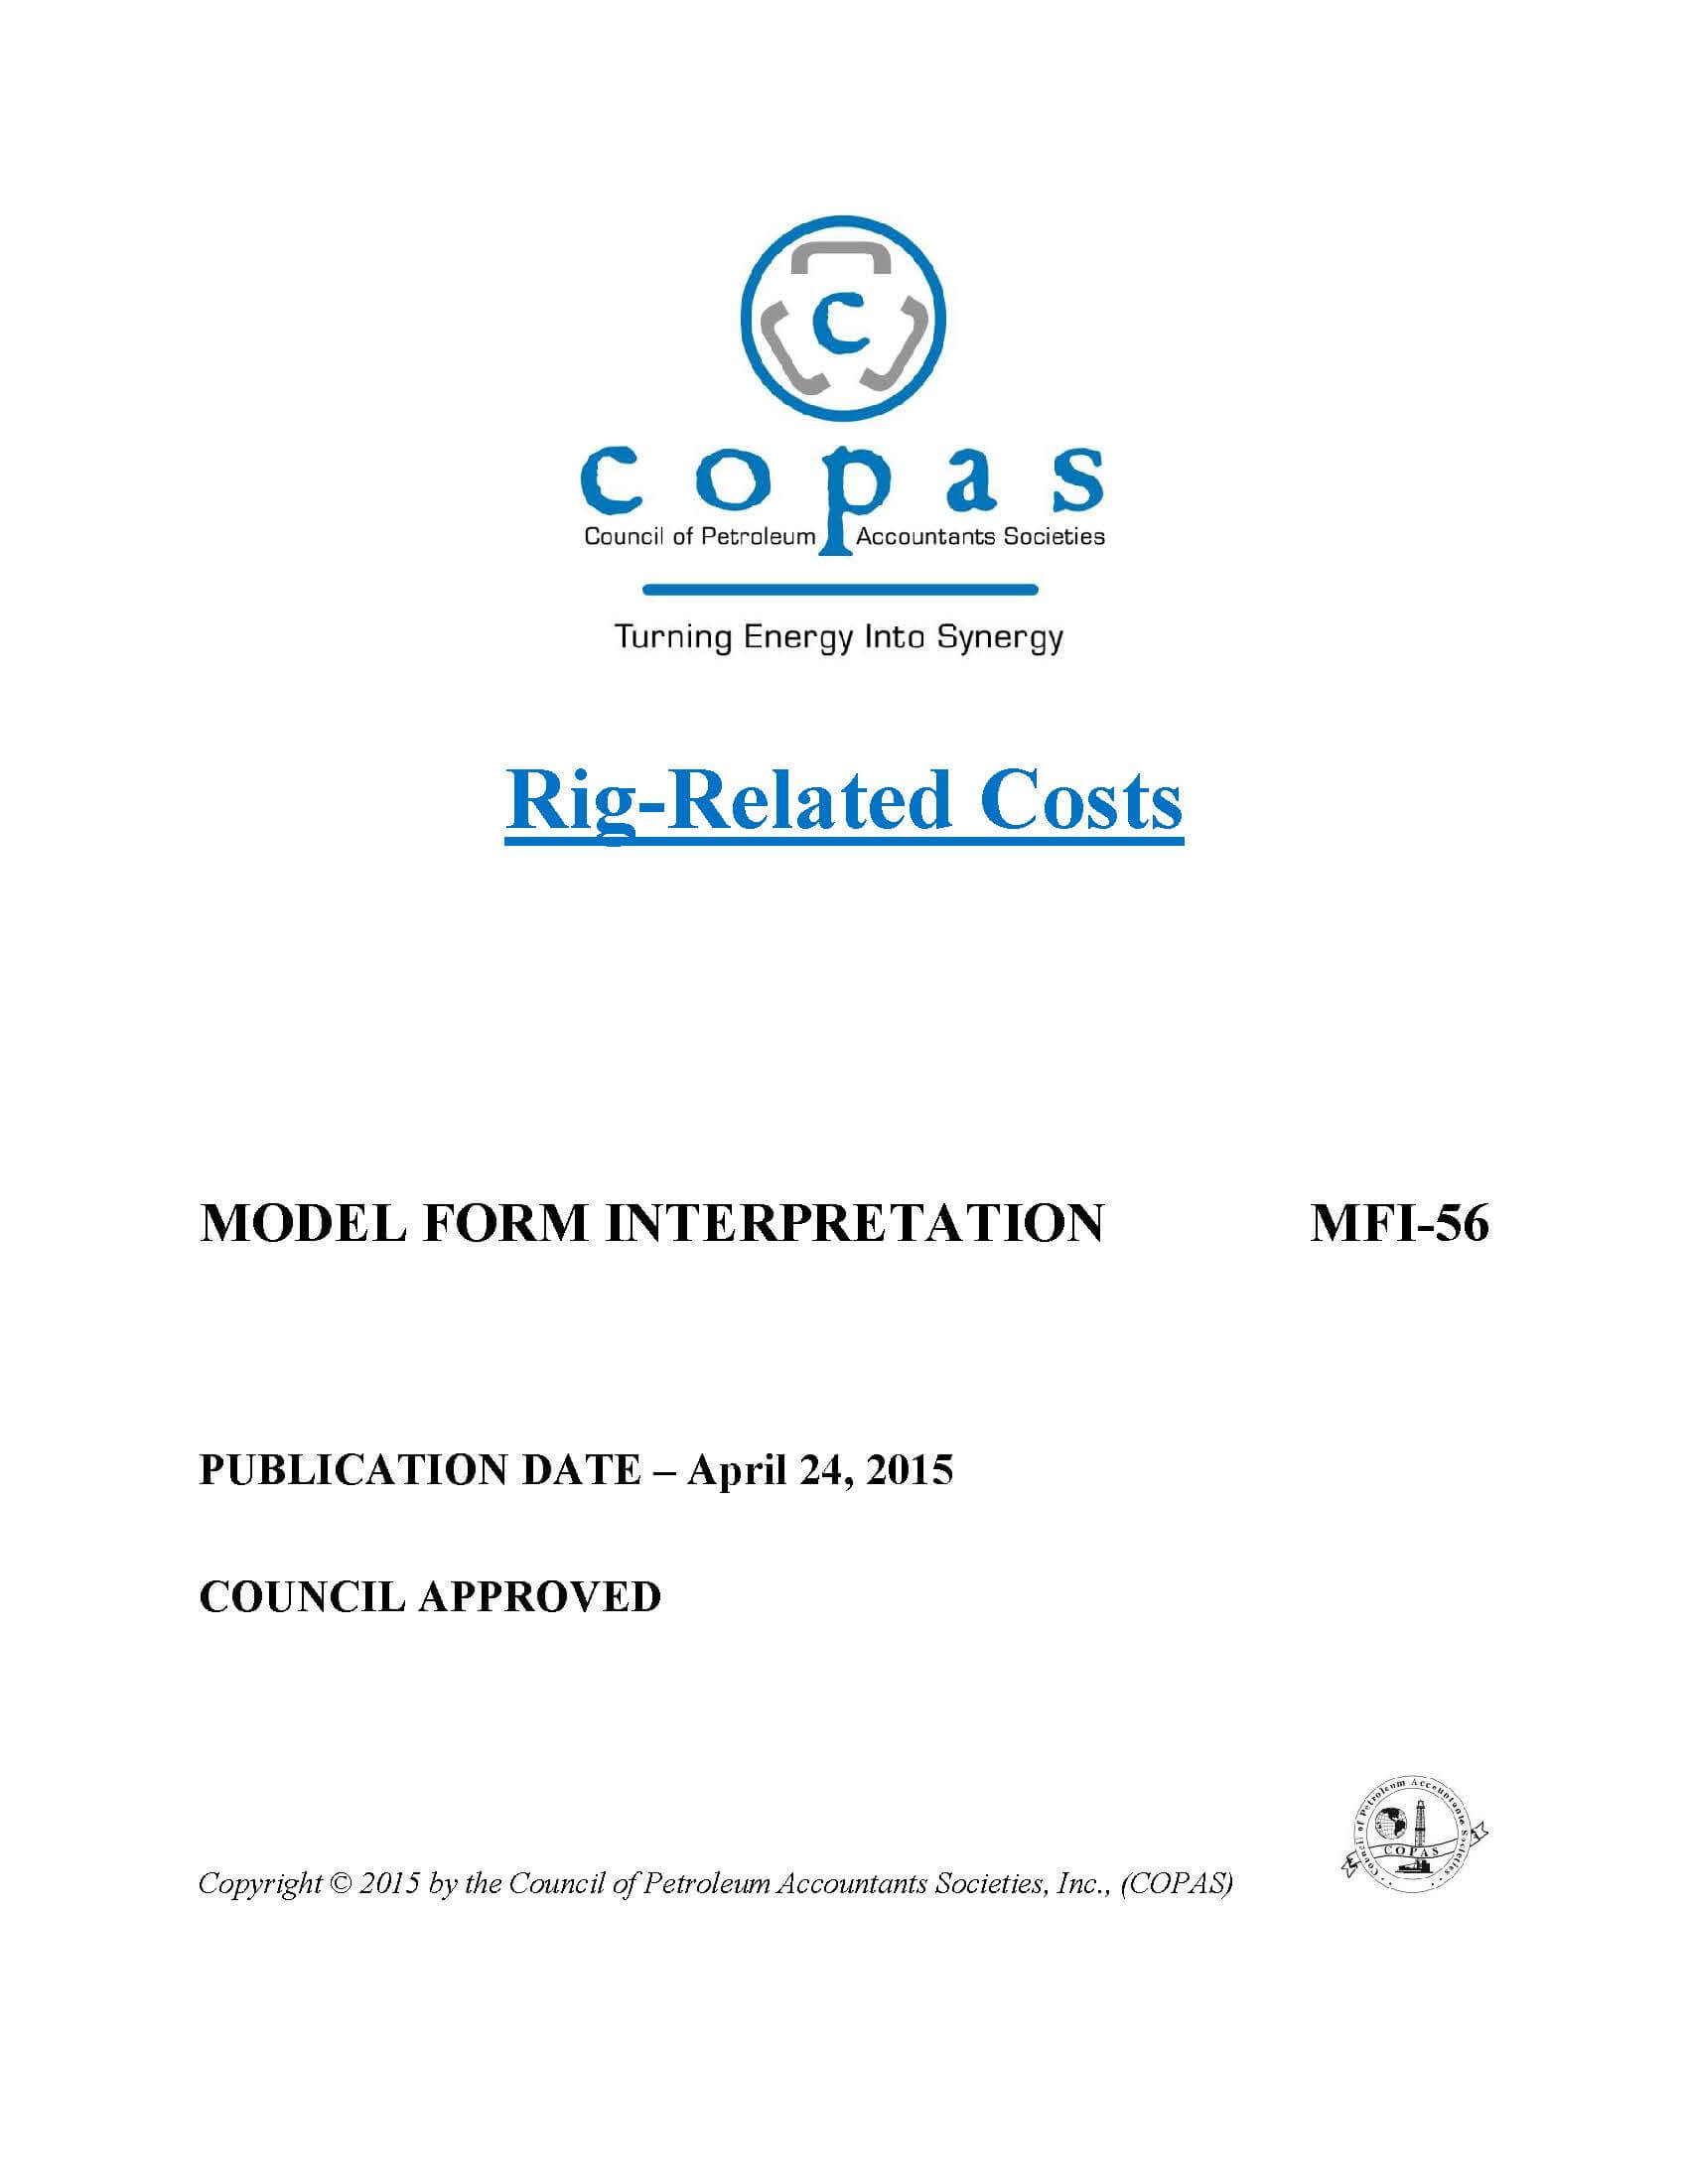 MFI-56 Rig-Related Costs - products MFI 56 Rig Related Costs - Council of Petroleum Accountants Societies